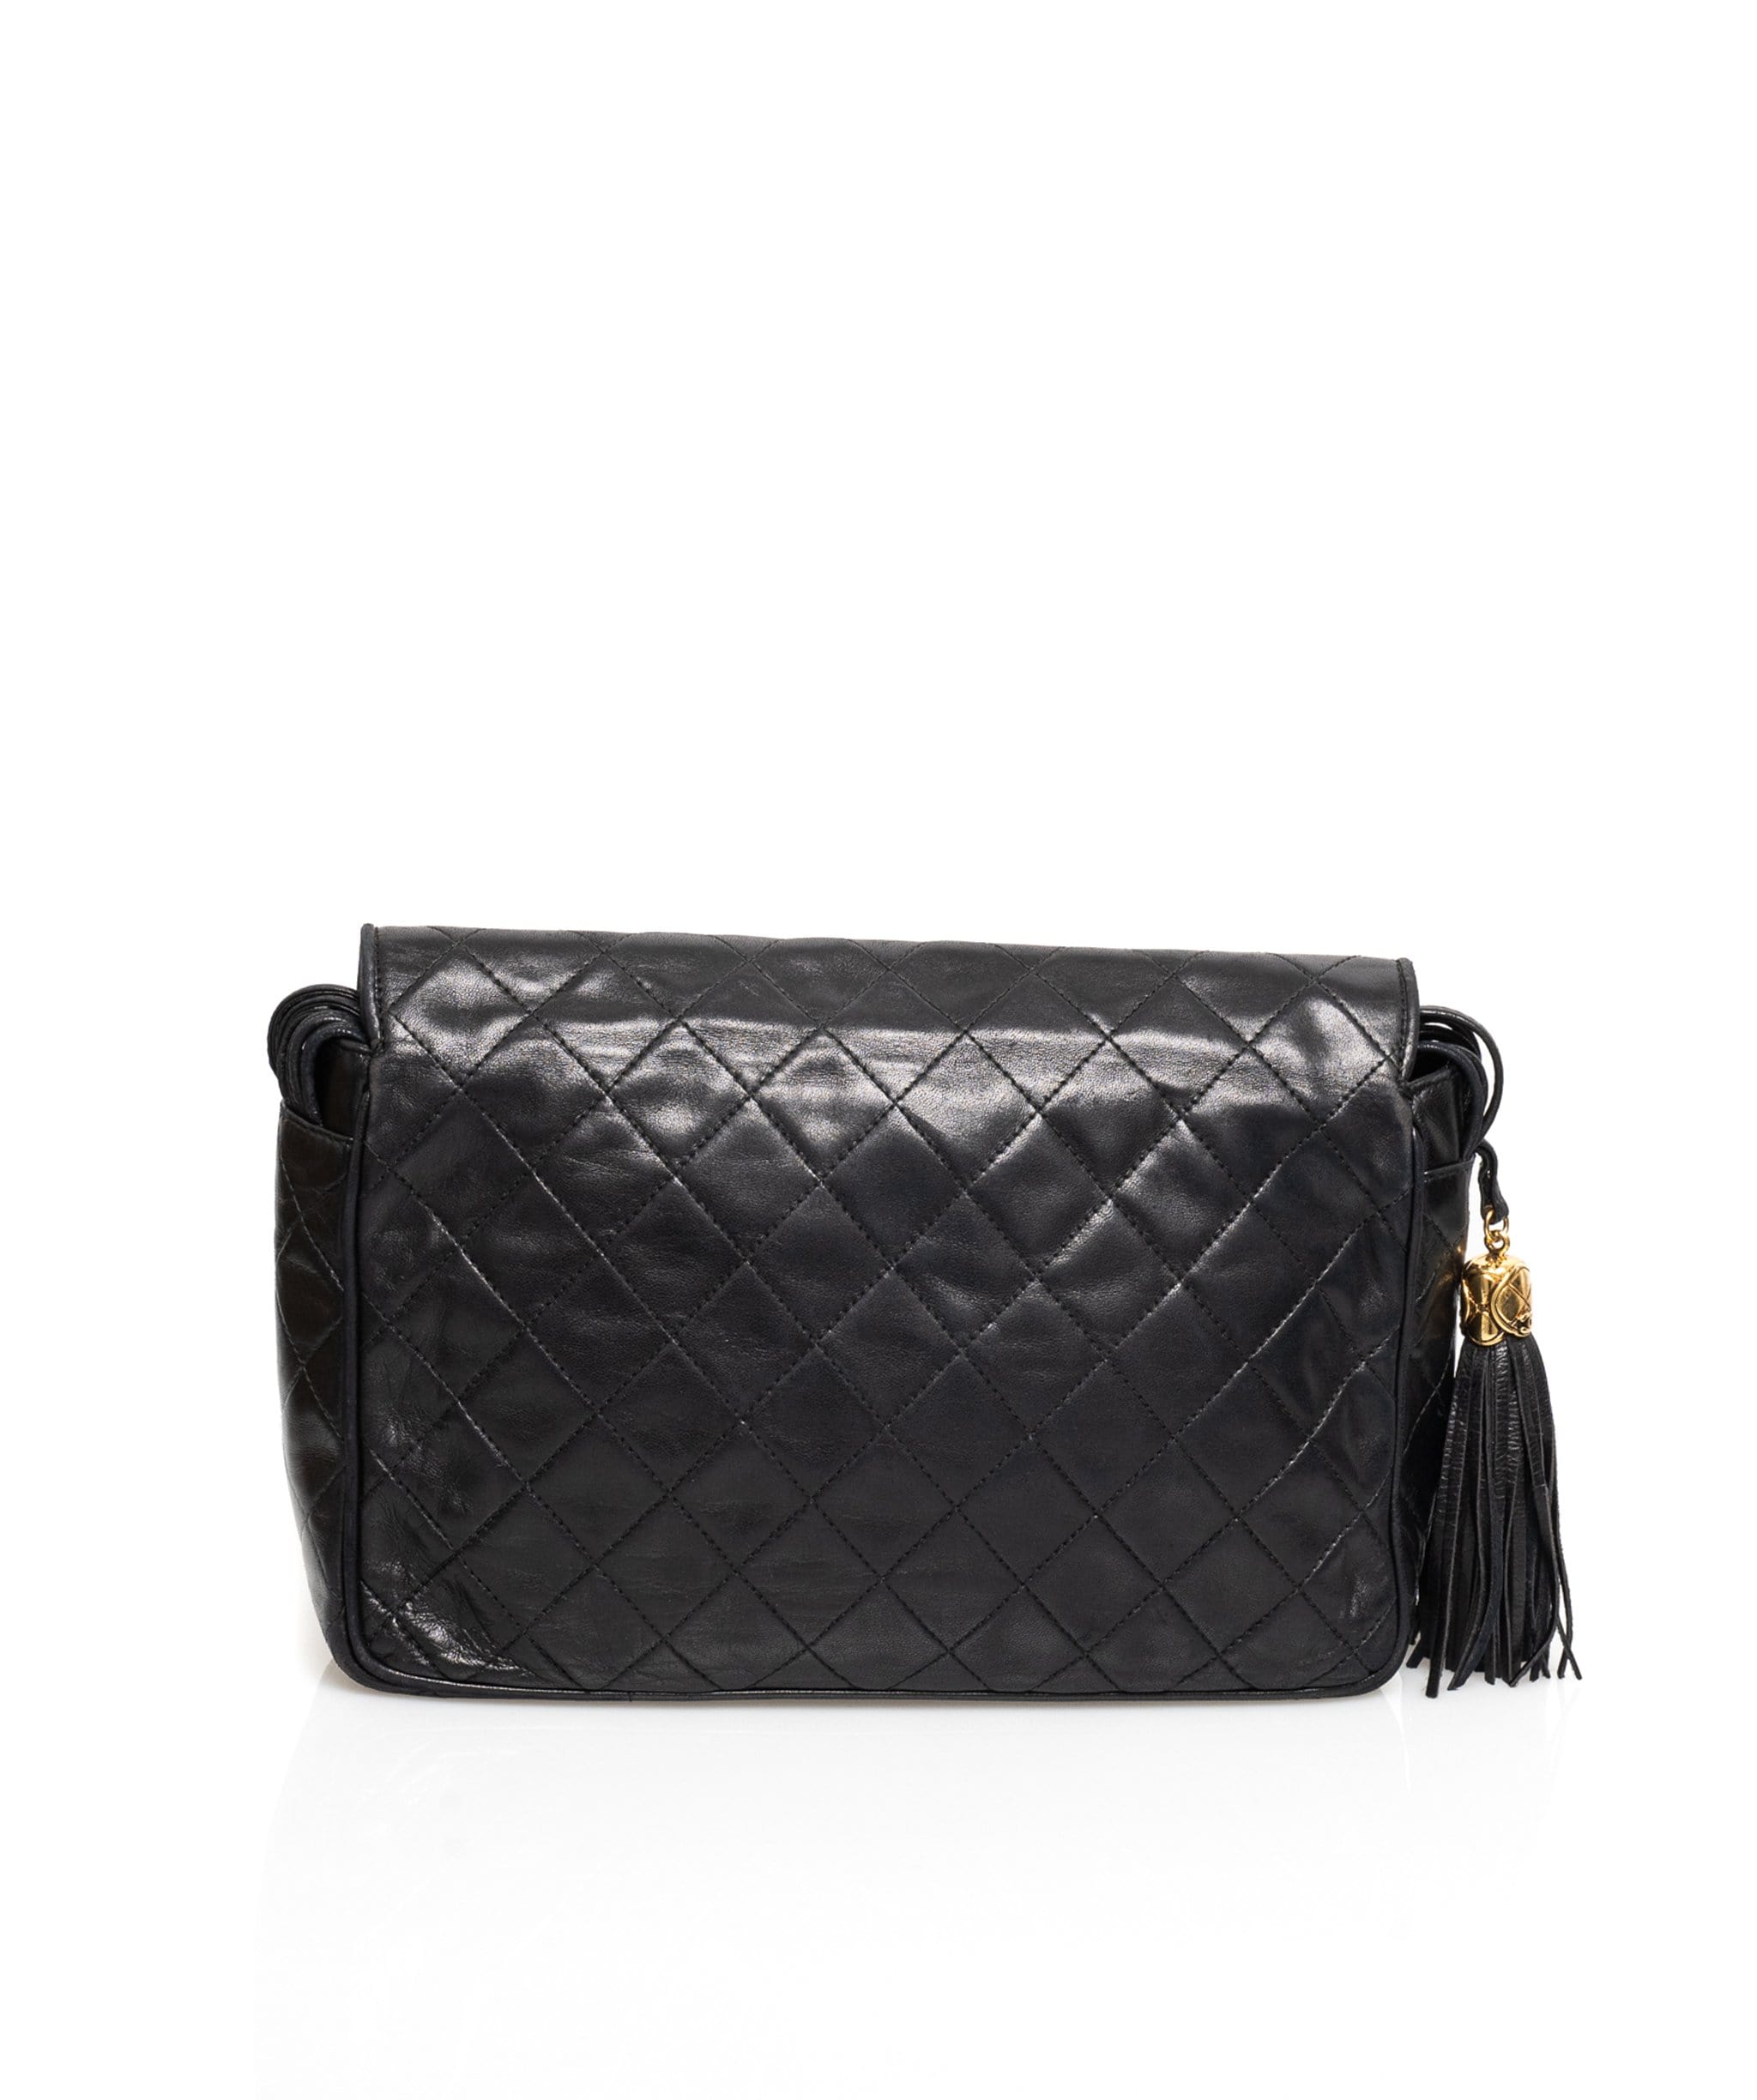 Chanel Chanel Vintage Lambskin Quilted Camera Flap Bag GHW AGL1078